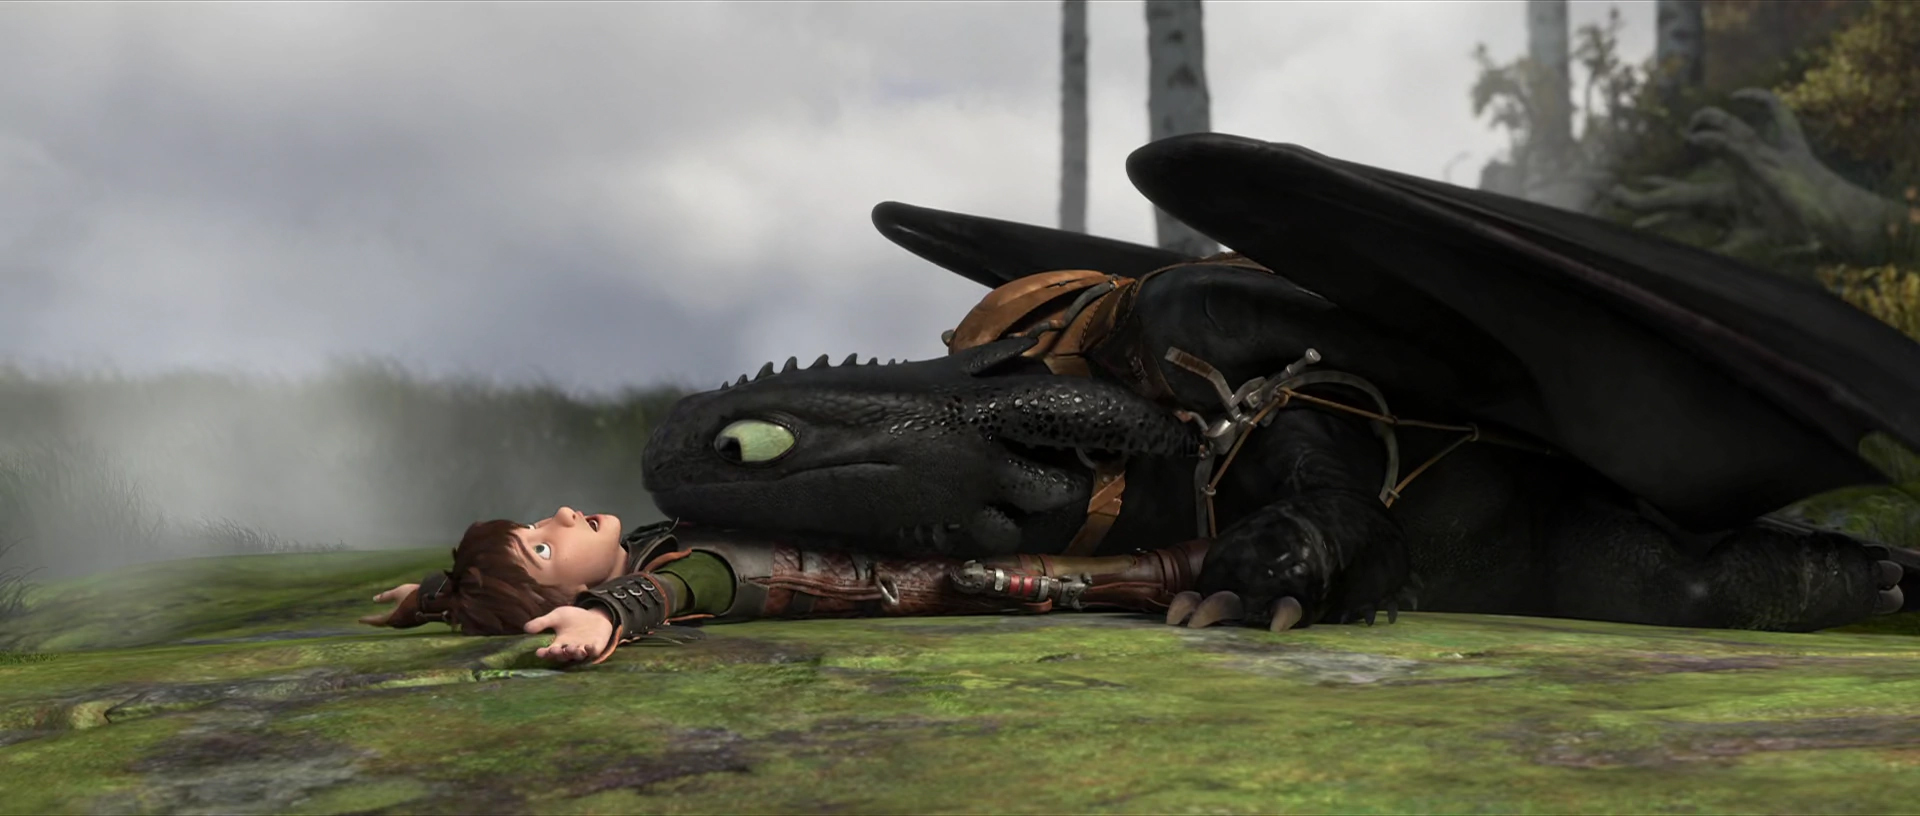 toothless on top of rider